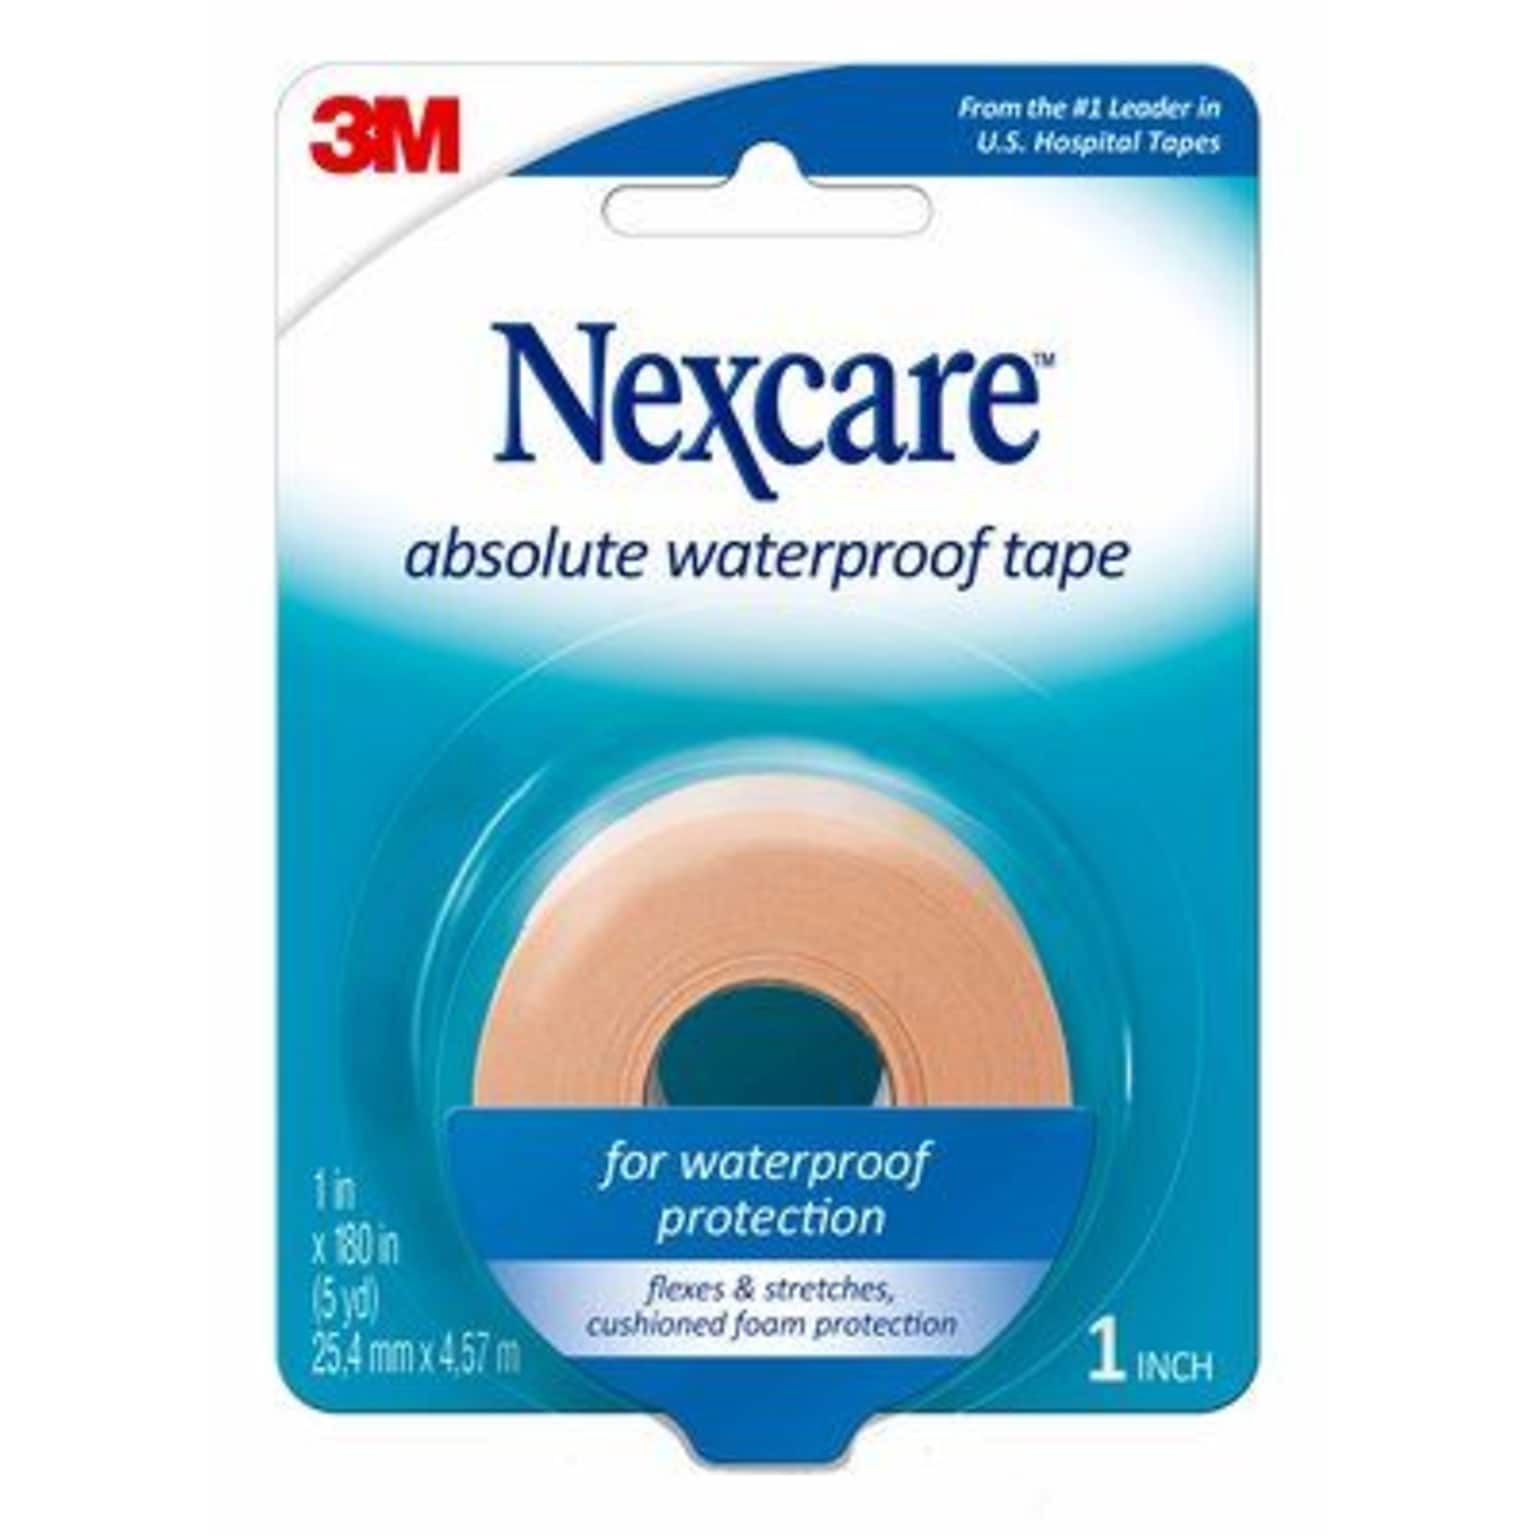 Nexcare Absolute Waterproof & Flexible First Aid Tape, 1 x 5 yds., Tan (731)